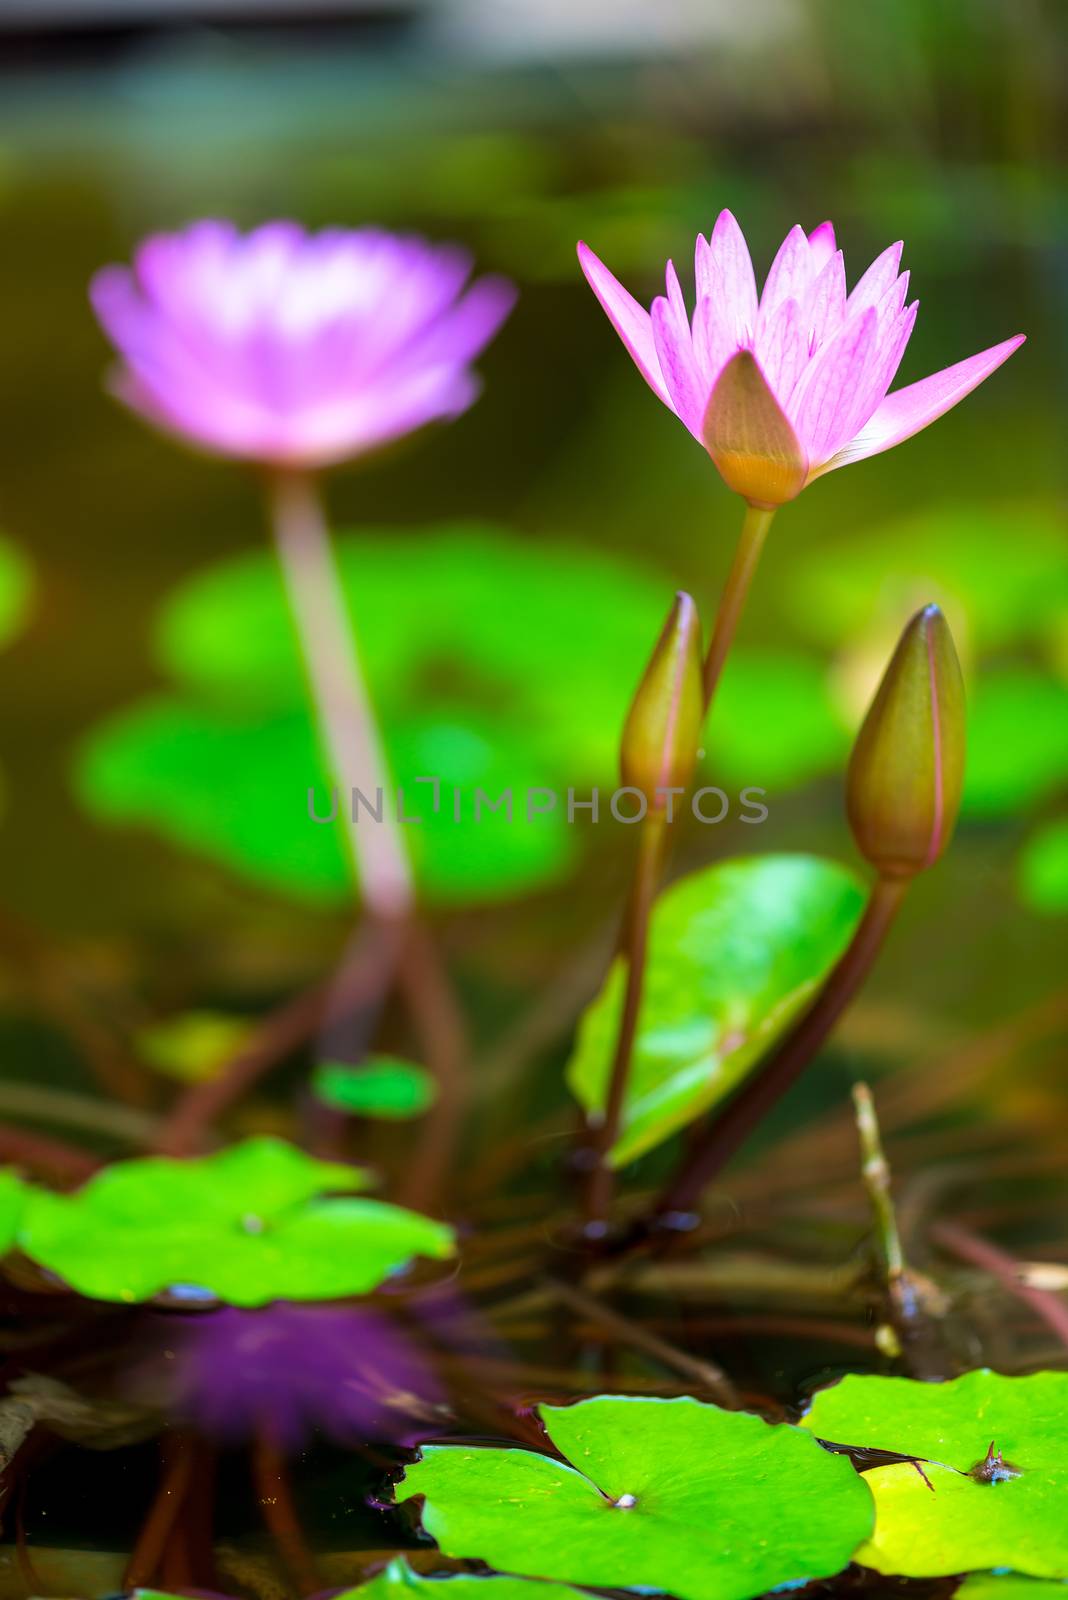 Flowers of a beautiful lilac lily close-up in a pond by kosmsos111